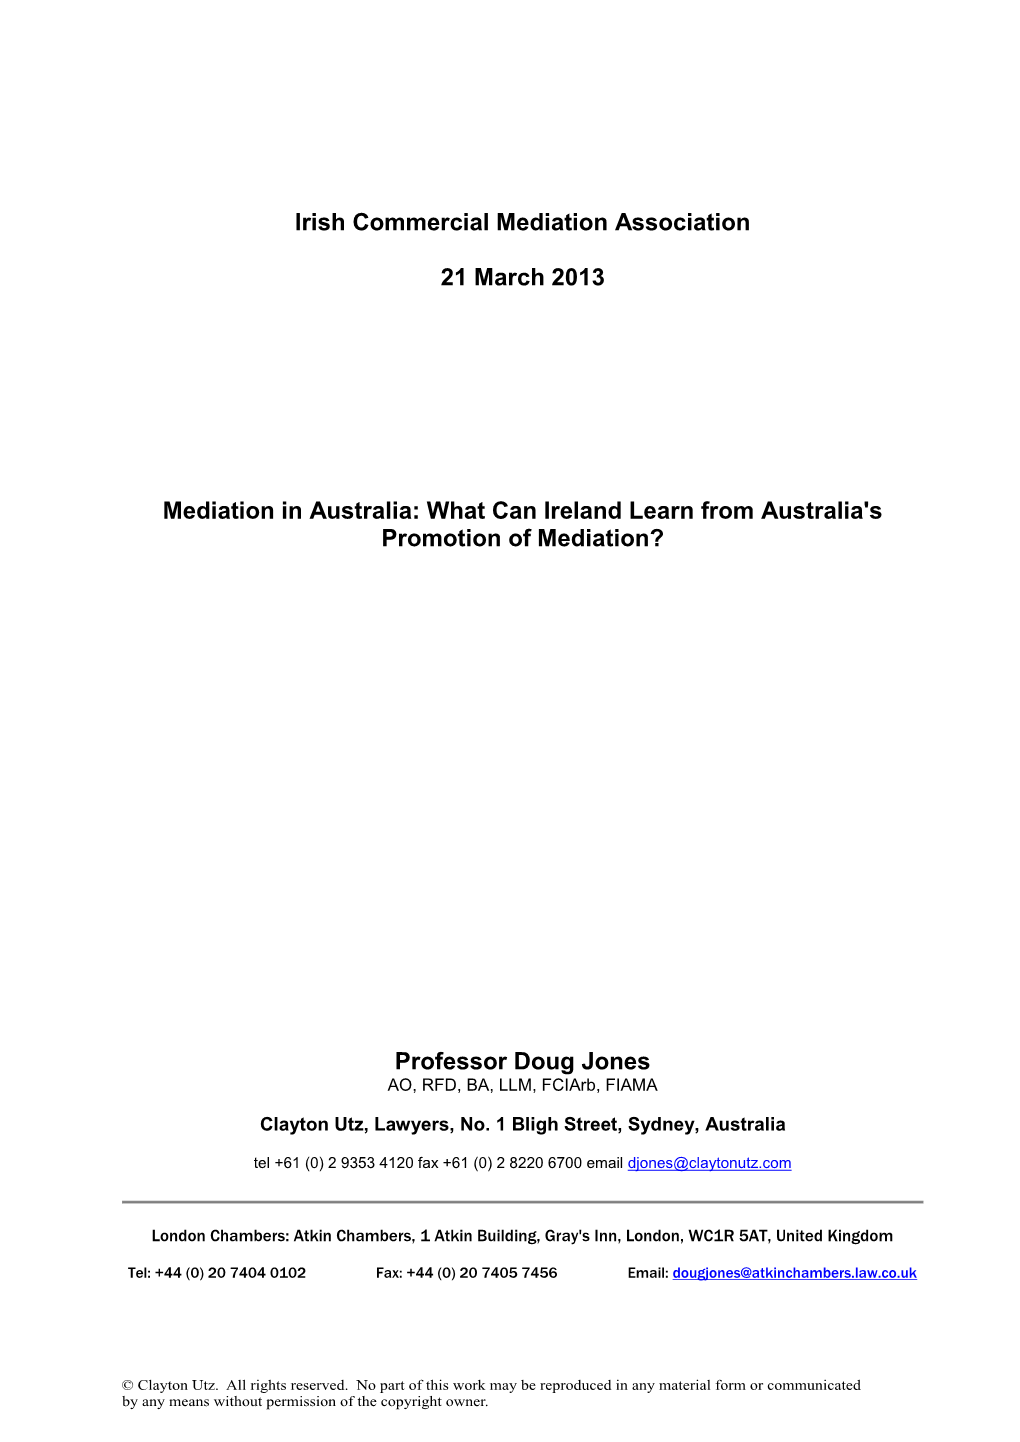 What Can Ireland Learn from Australia's Promotion of Mediation?